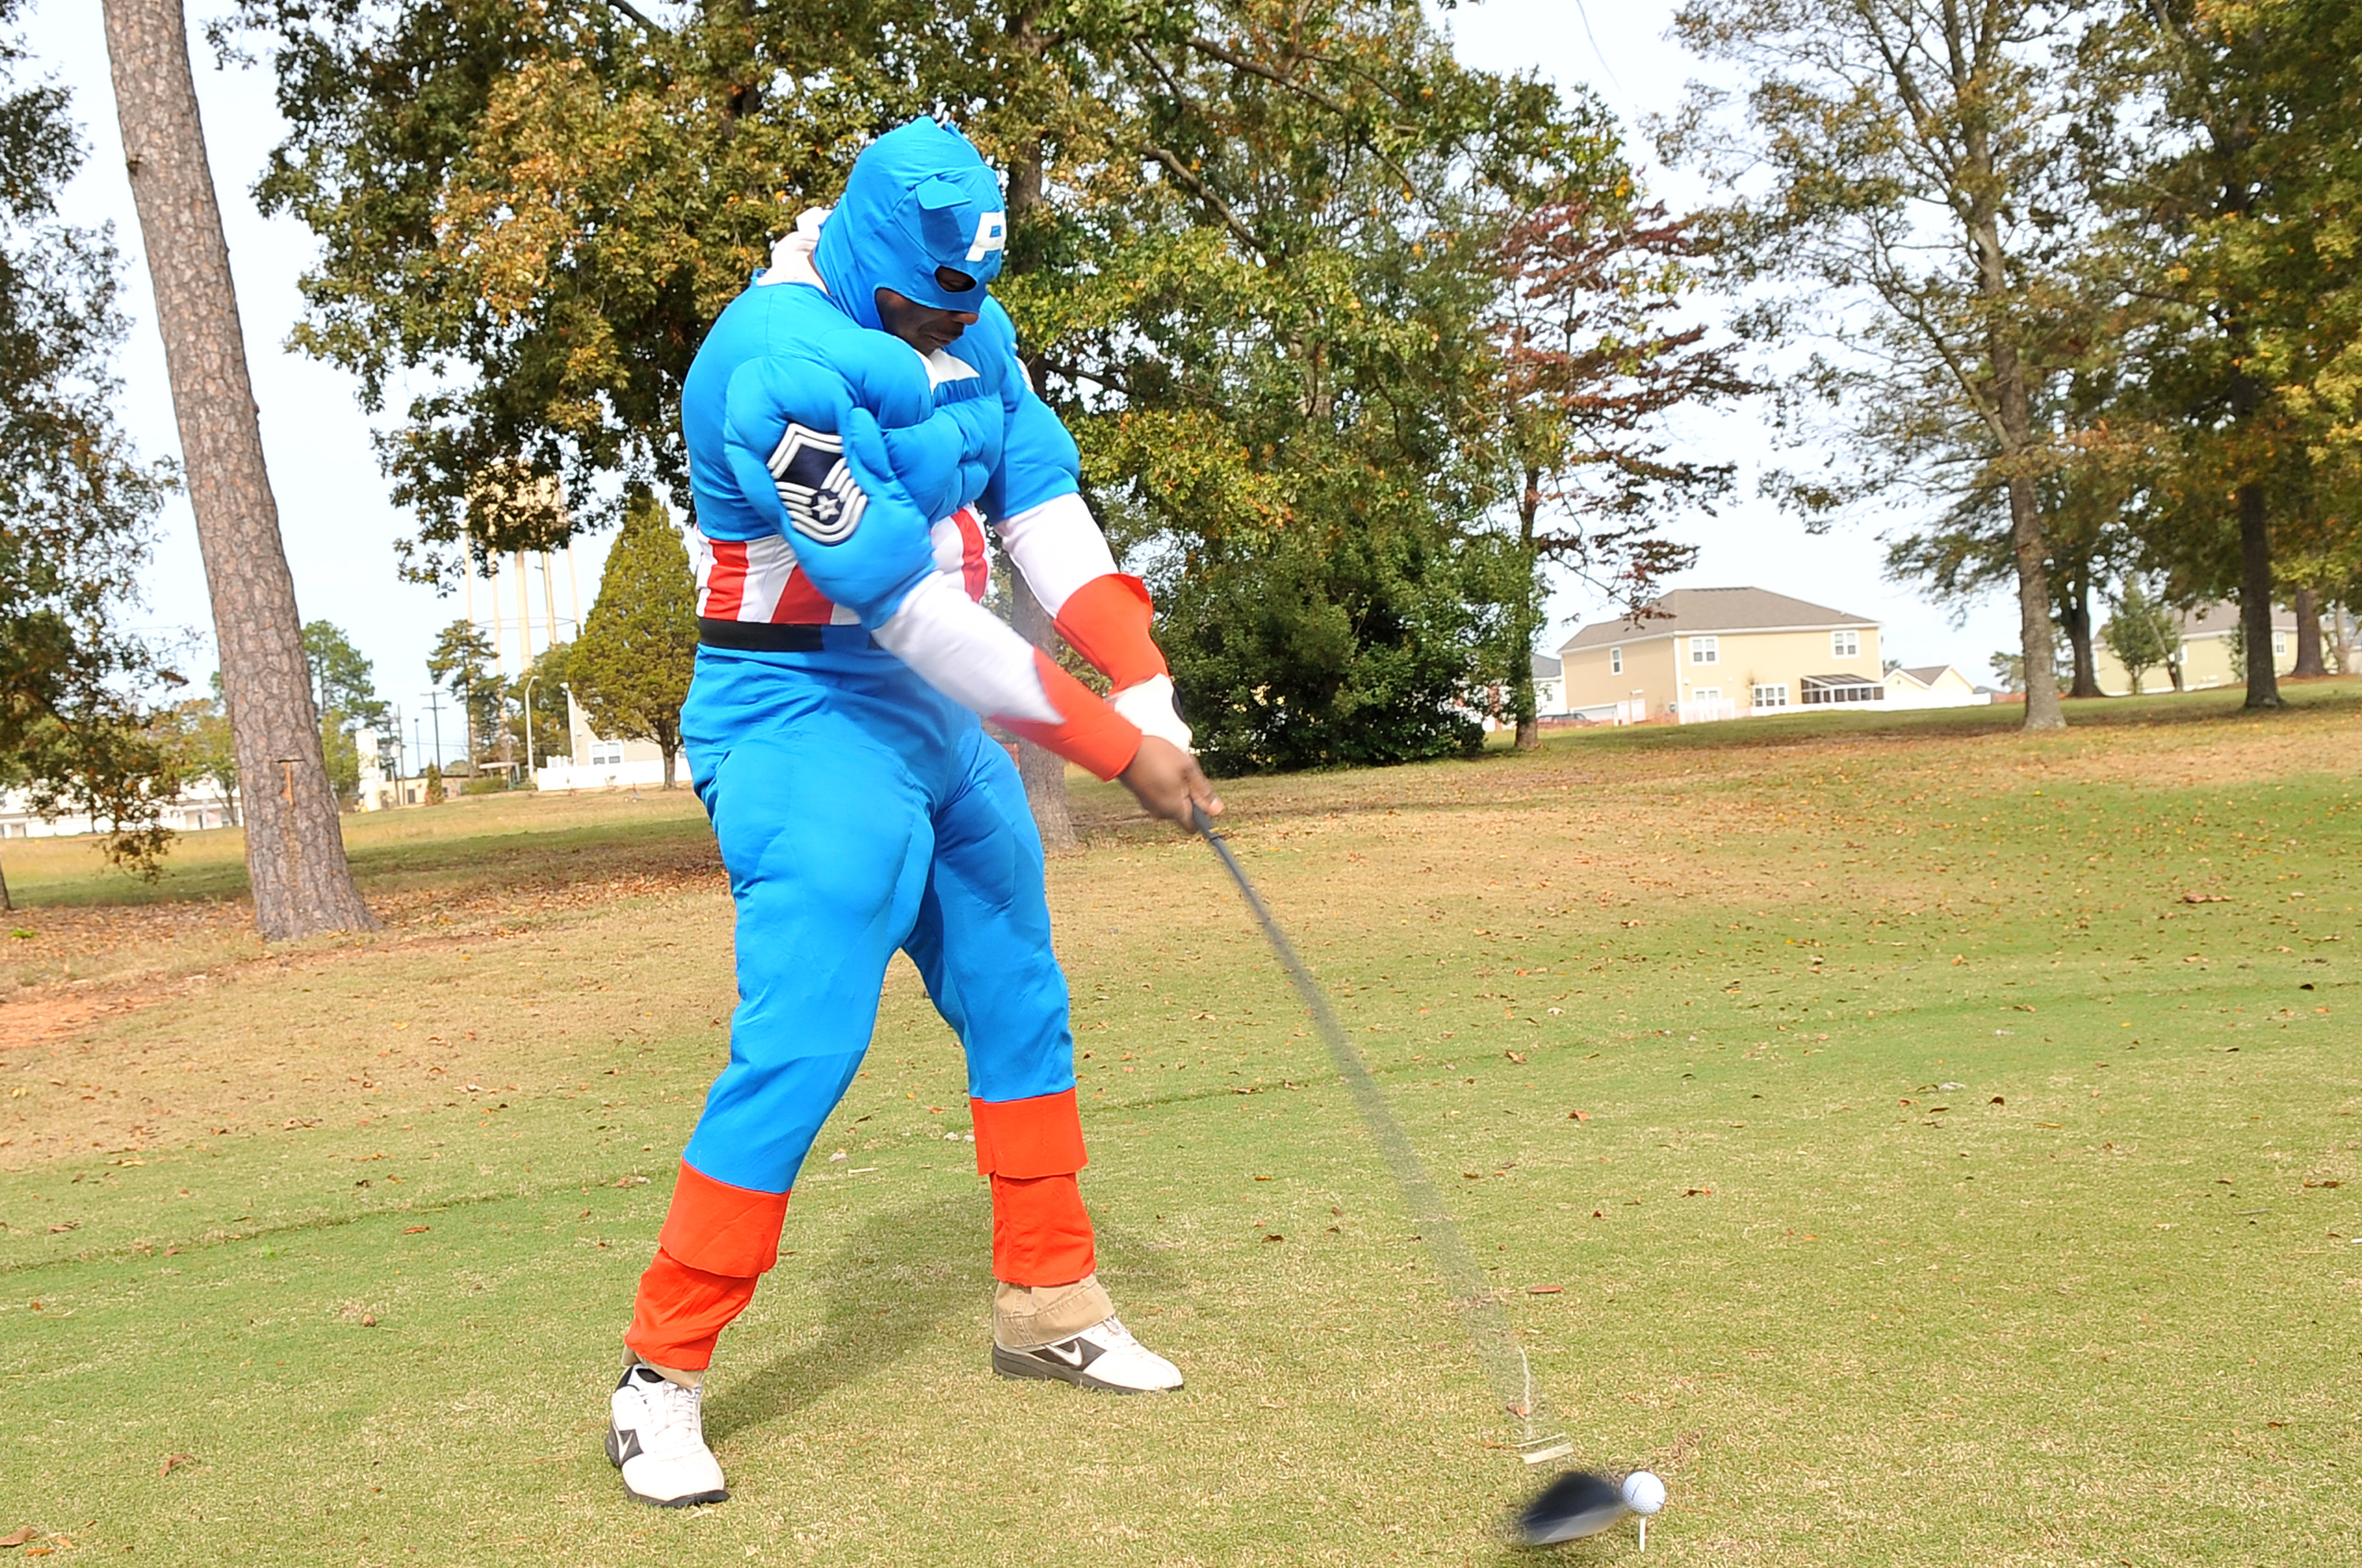 U.S. Air Force Senior Master Sgt. Richard Crivens, 20th Contracting Squadron superintendent, takes a swing in a round of golf, Shaw Air Force Base, S.C. Oct. 26, 2012.The tournament was raised to help raise money for some holiday events in the upcoming future. (U.S. Air Force photo by Airman 1st Class Ashley L. Gardner/ Released)